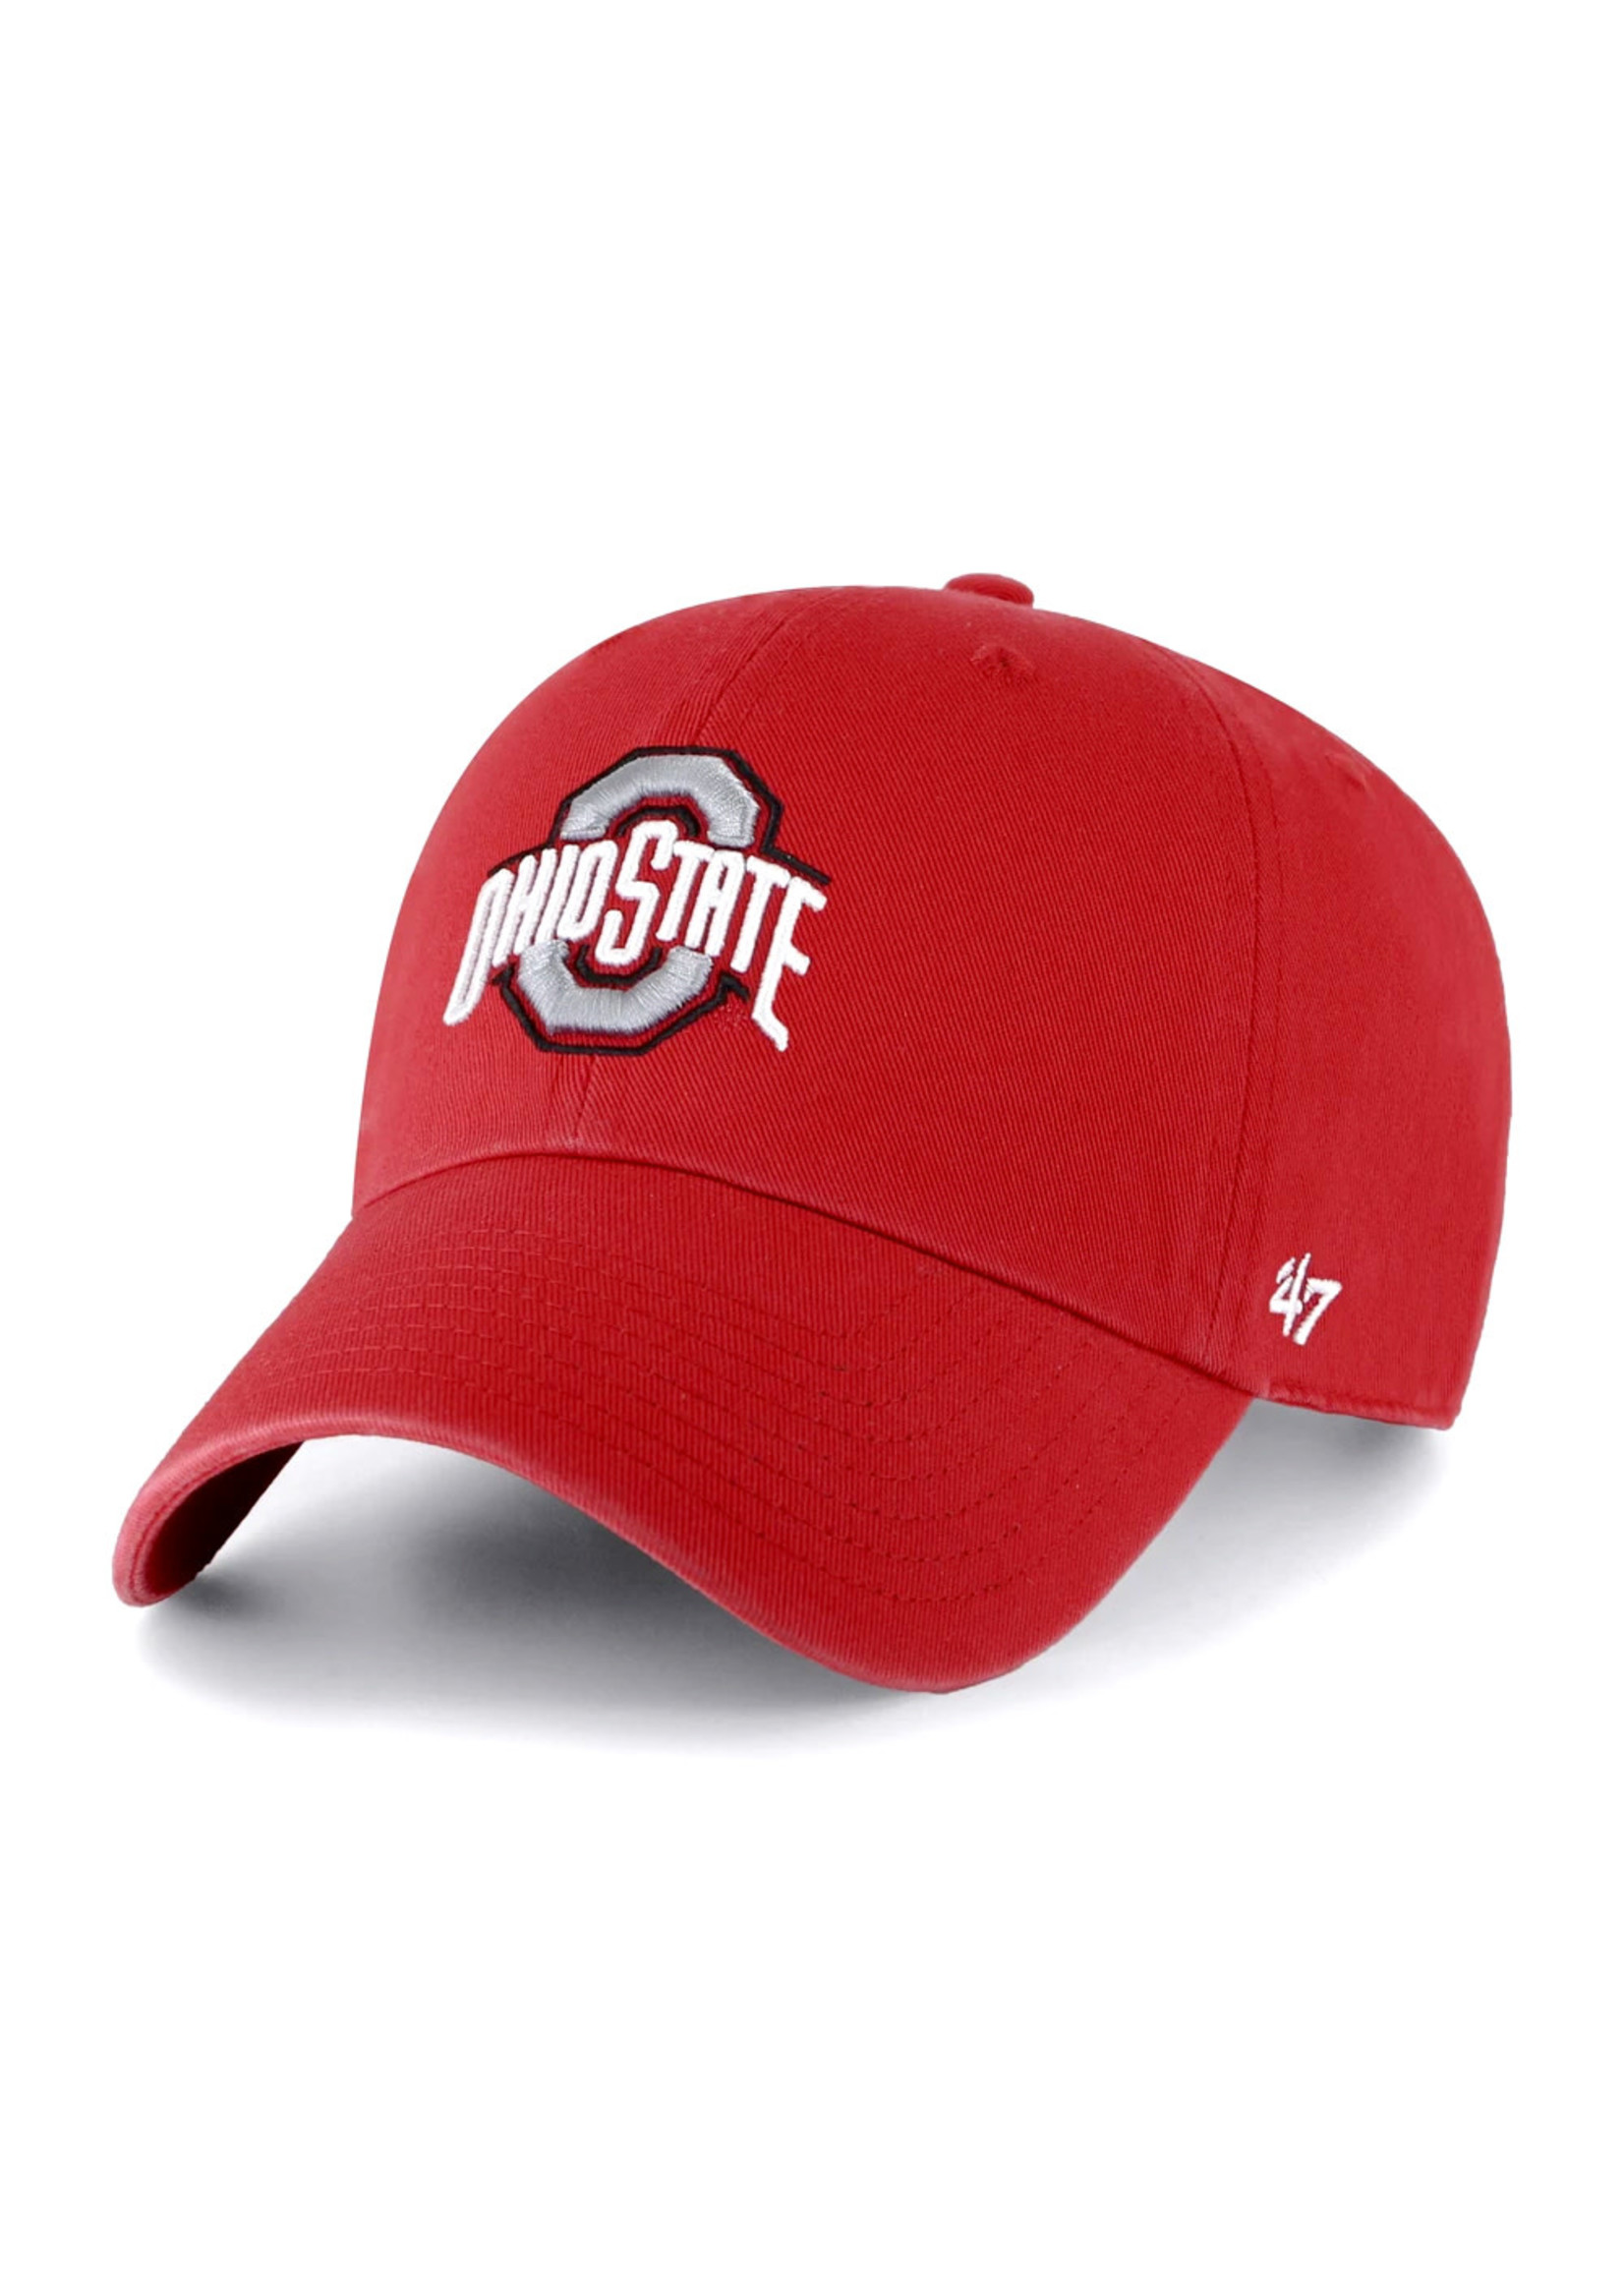 47 Brand Ohio State Buckeyes Athletic O Red Adjustable Hat